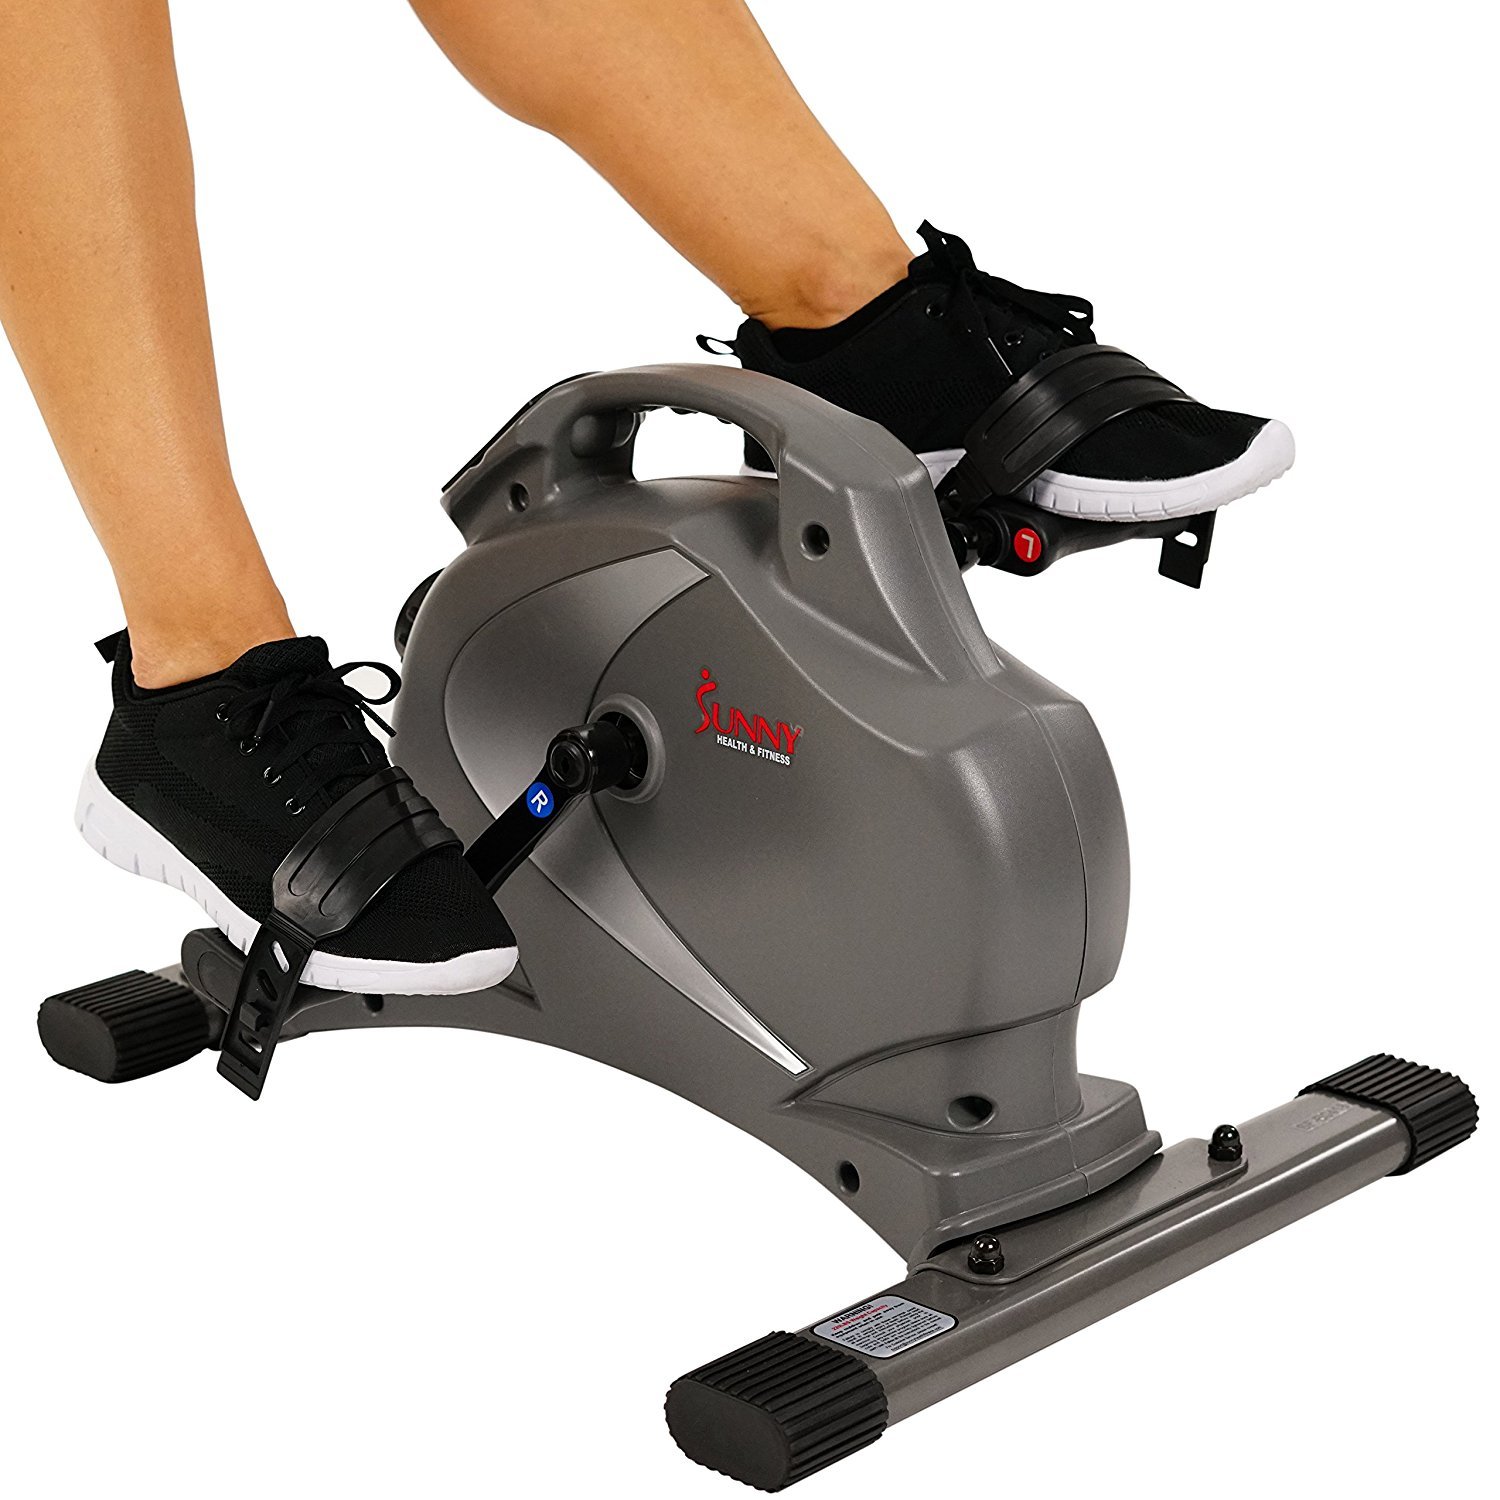 [REVIEW] 2019 Best Exercise Equipment for Parkinson